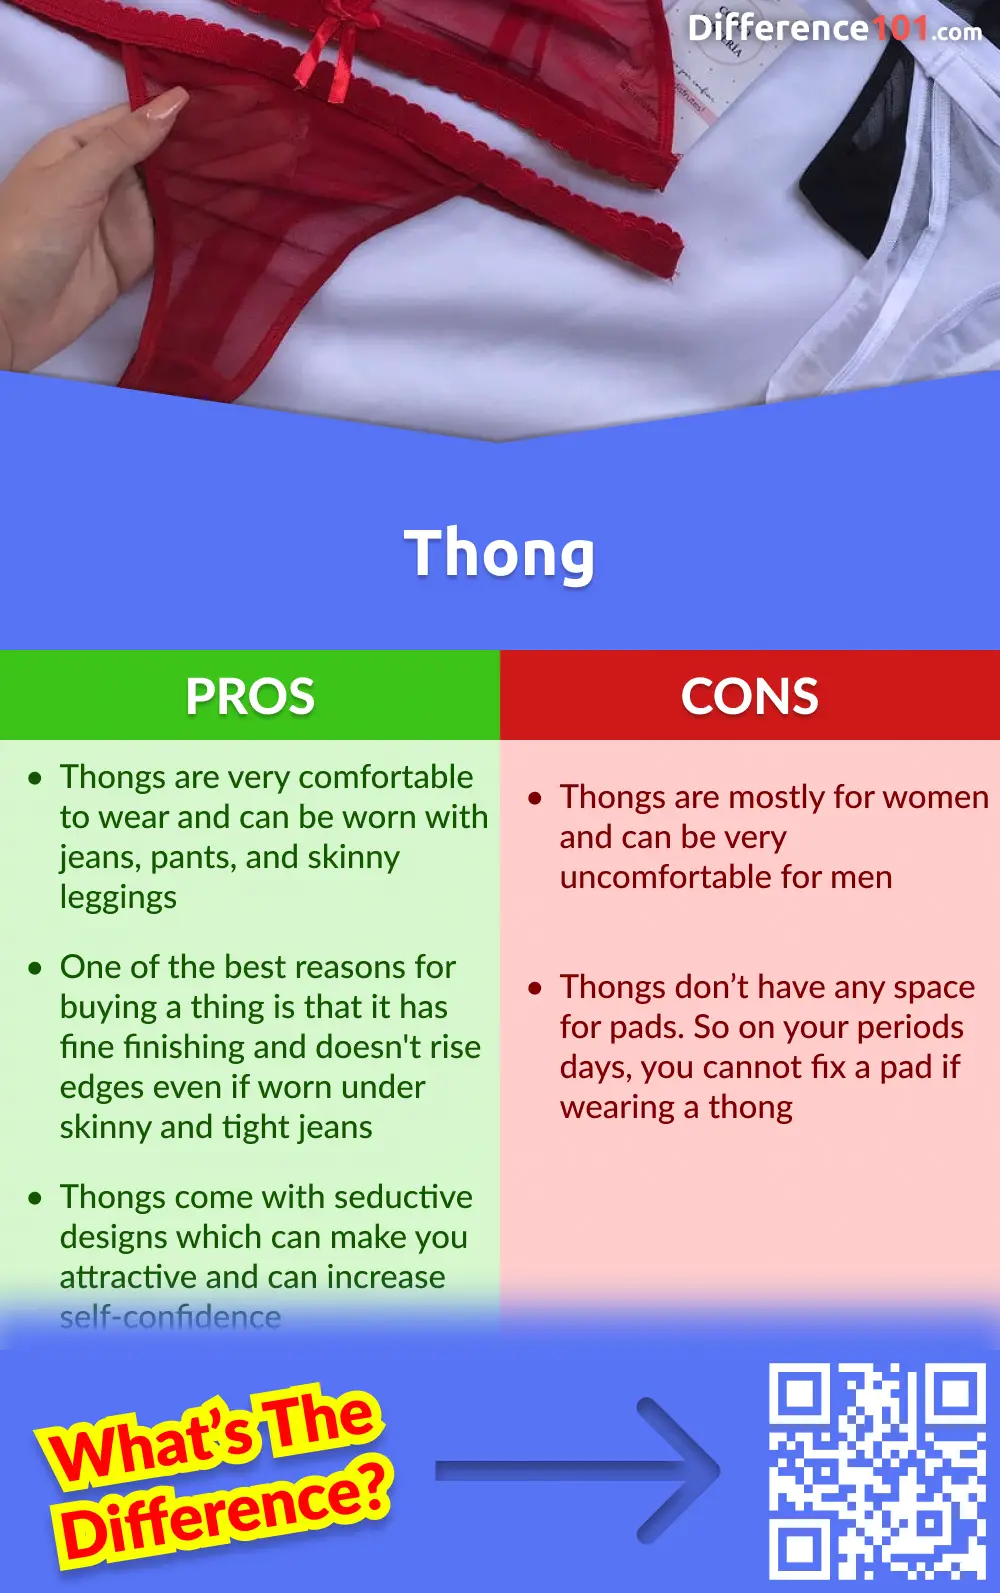 Pros and cons of Thong